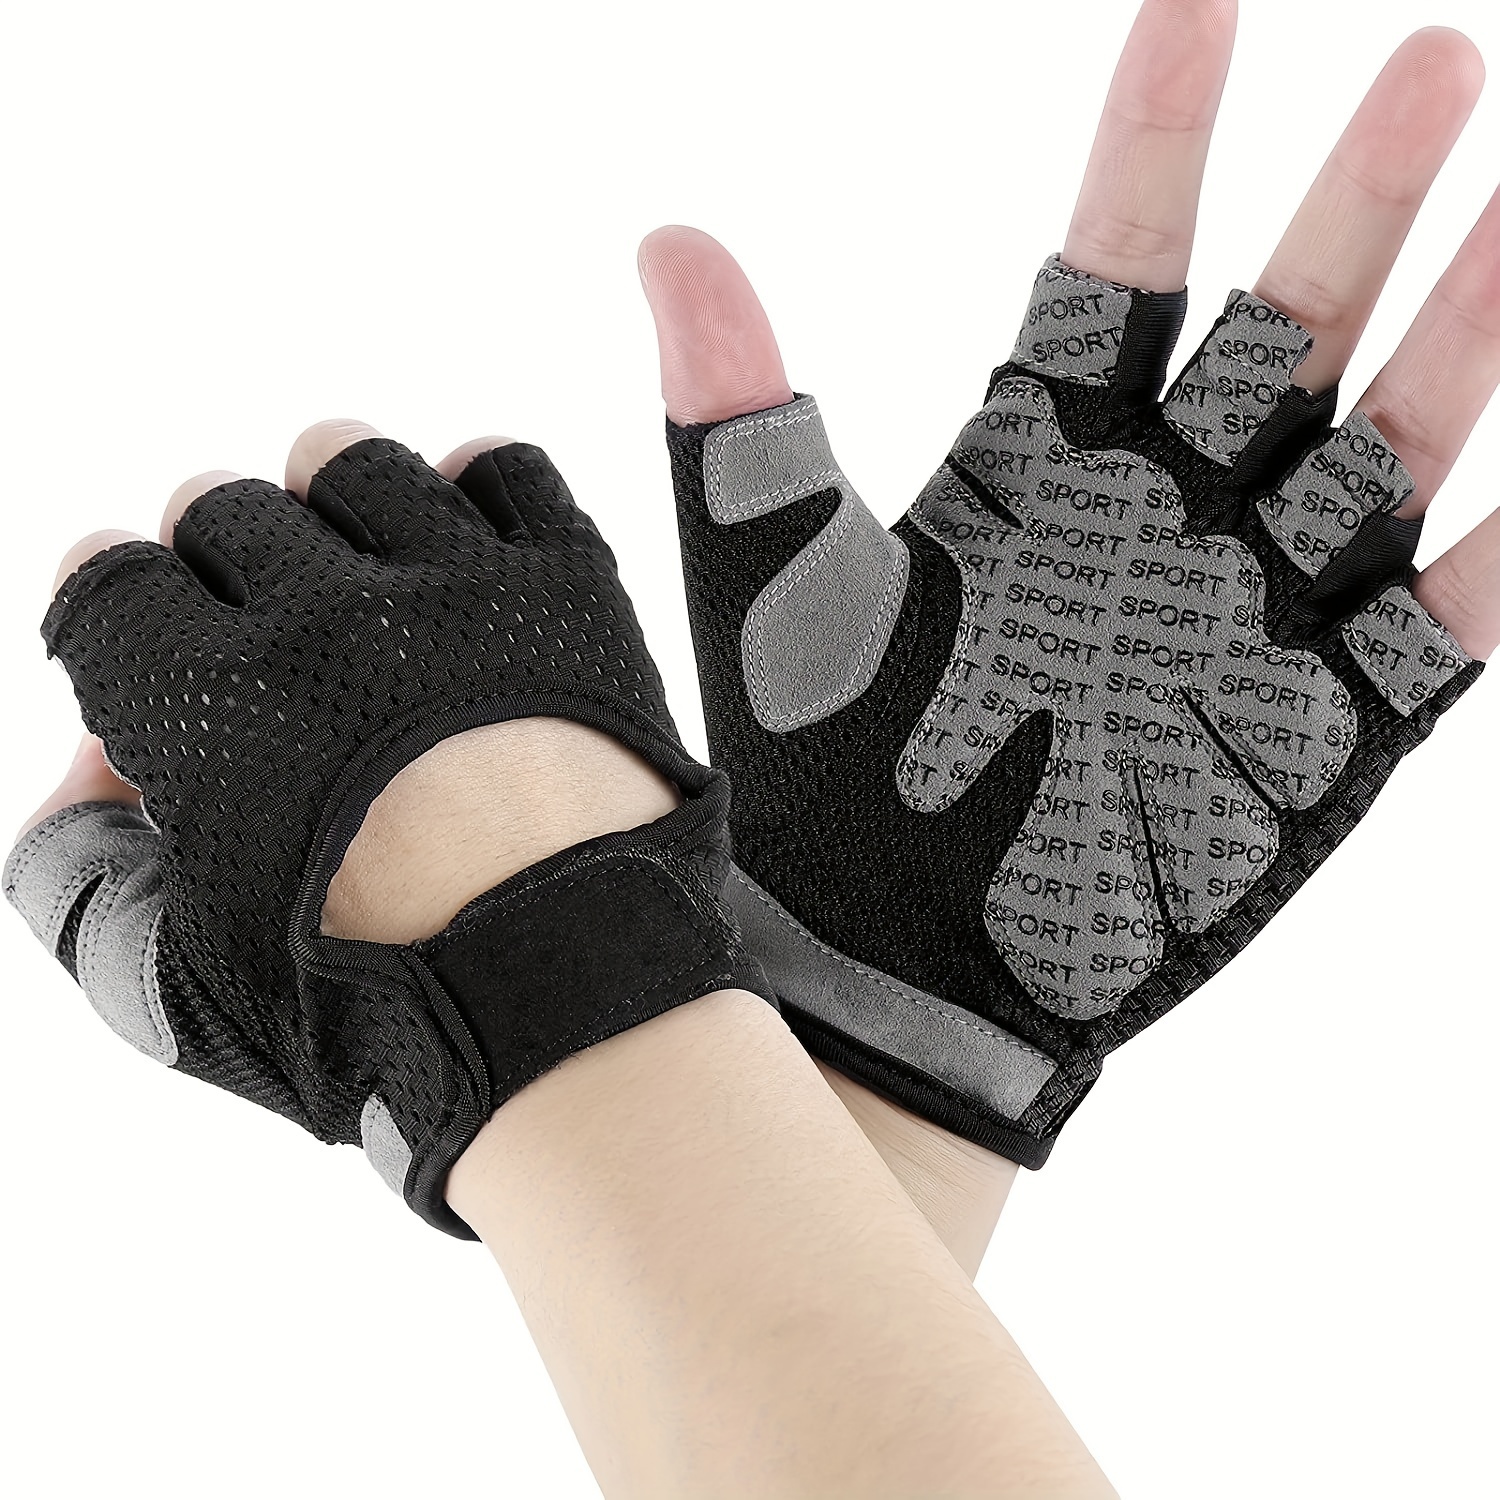 

1 Pair Non-slip Fitness Gloves, Fingerless Workout Gloves, Suitable For Weightlifting, Sports Full Palm Protection, Fishing, Cycling, Gym Workouts, Fitness Training